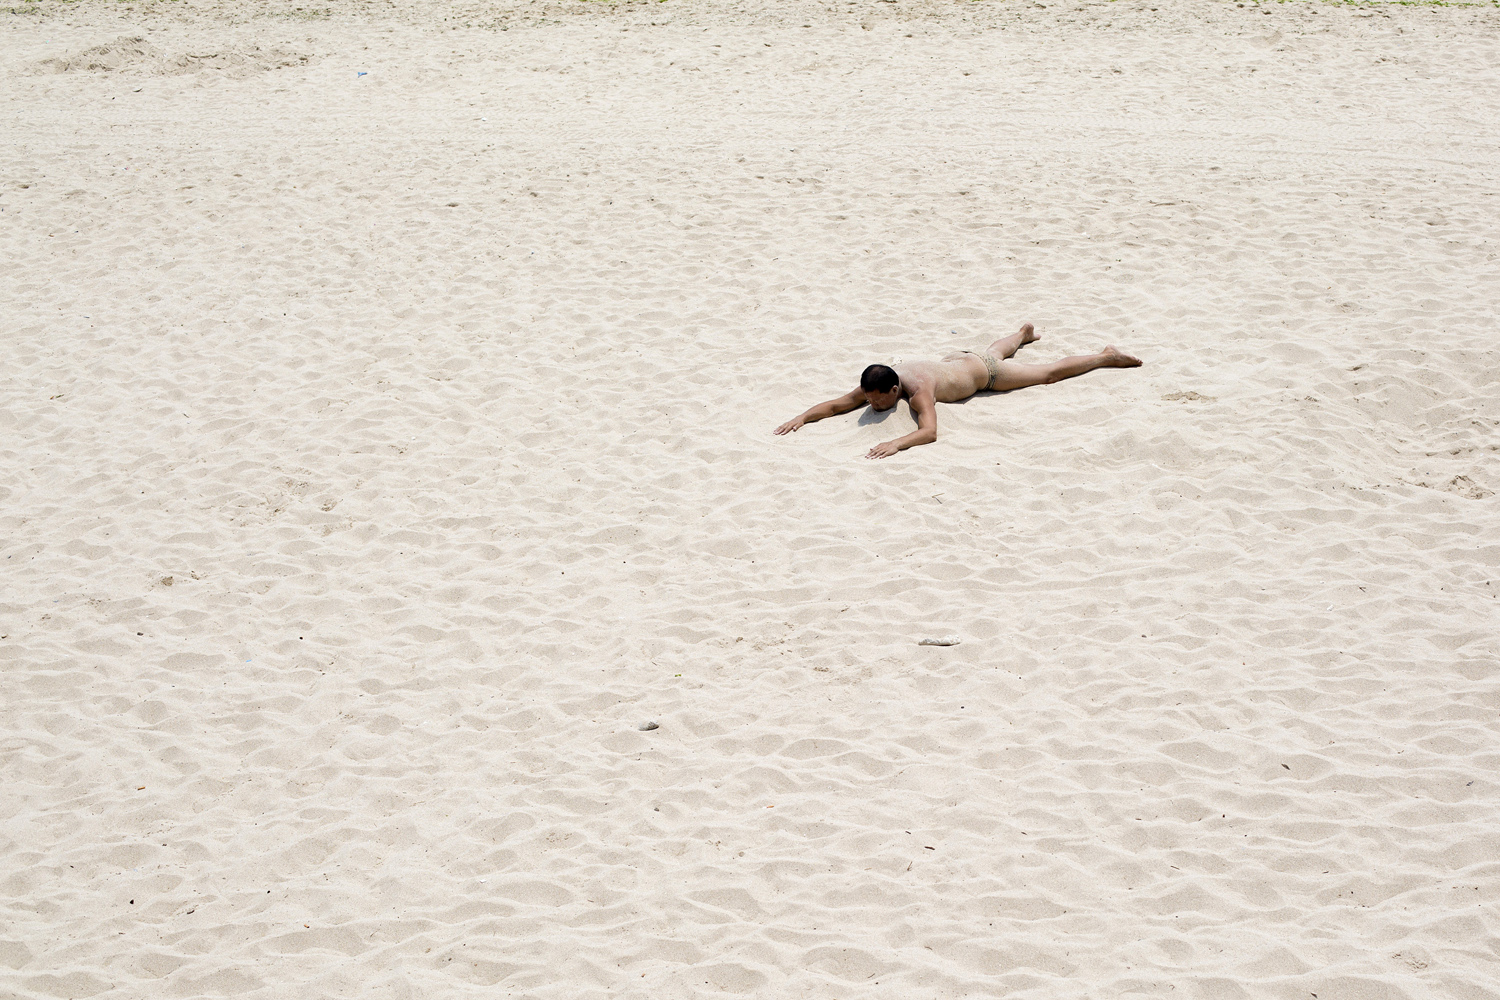 Apr. 7, 2014. A man sunbathes on the beach in the Dadonghai district of Sanya, Hainan Province, China.